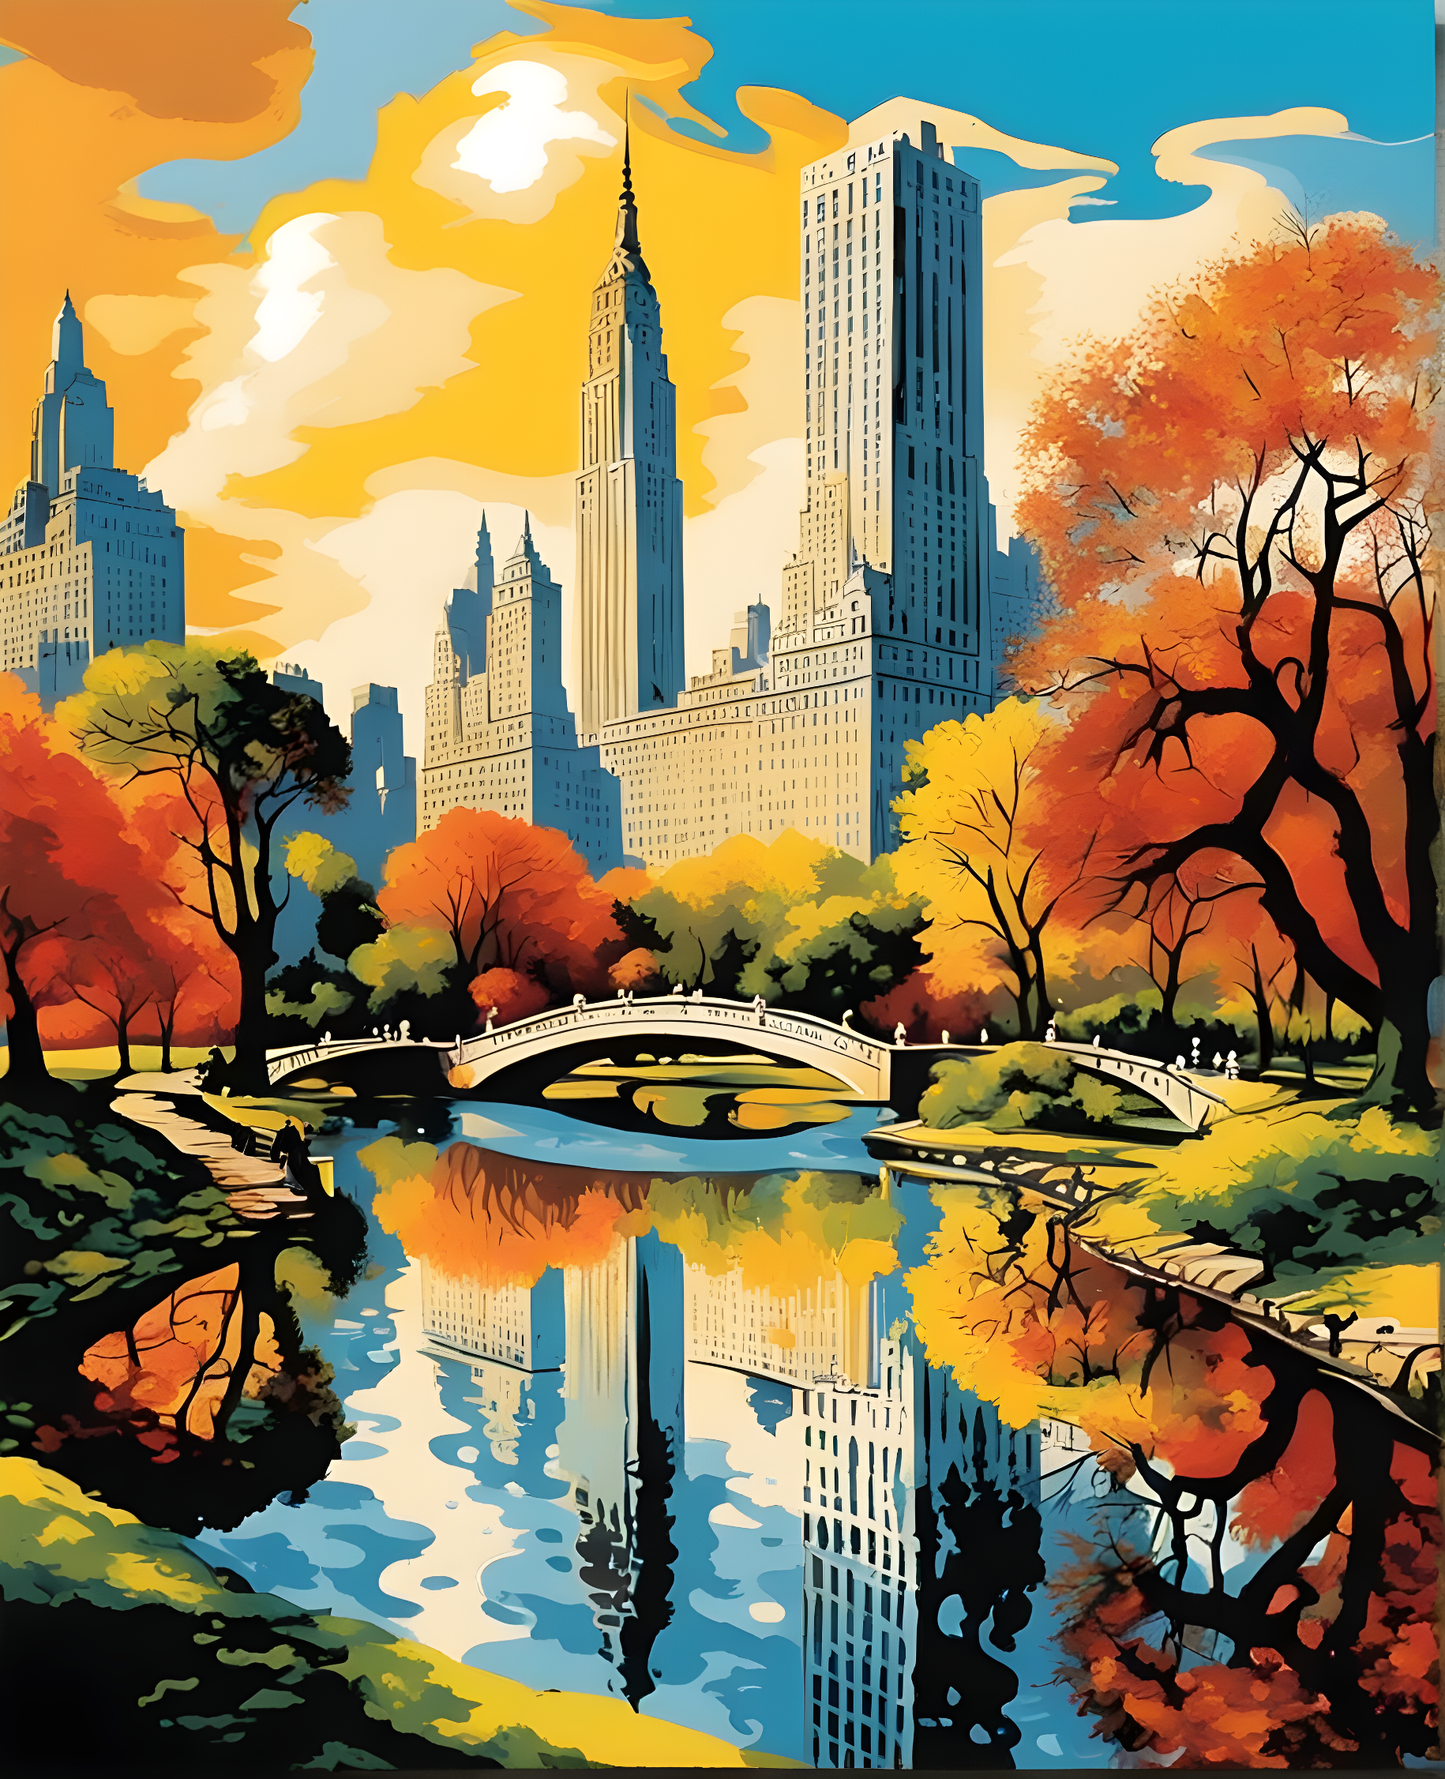 Central Park, Manhattan Collection PD (3) - Van-Go Paint-By-Number Kit